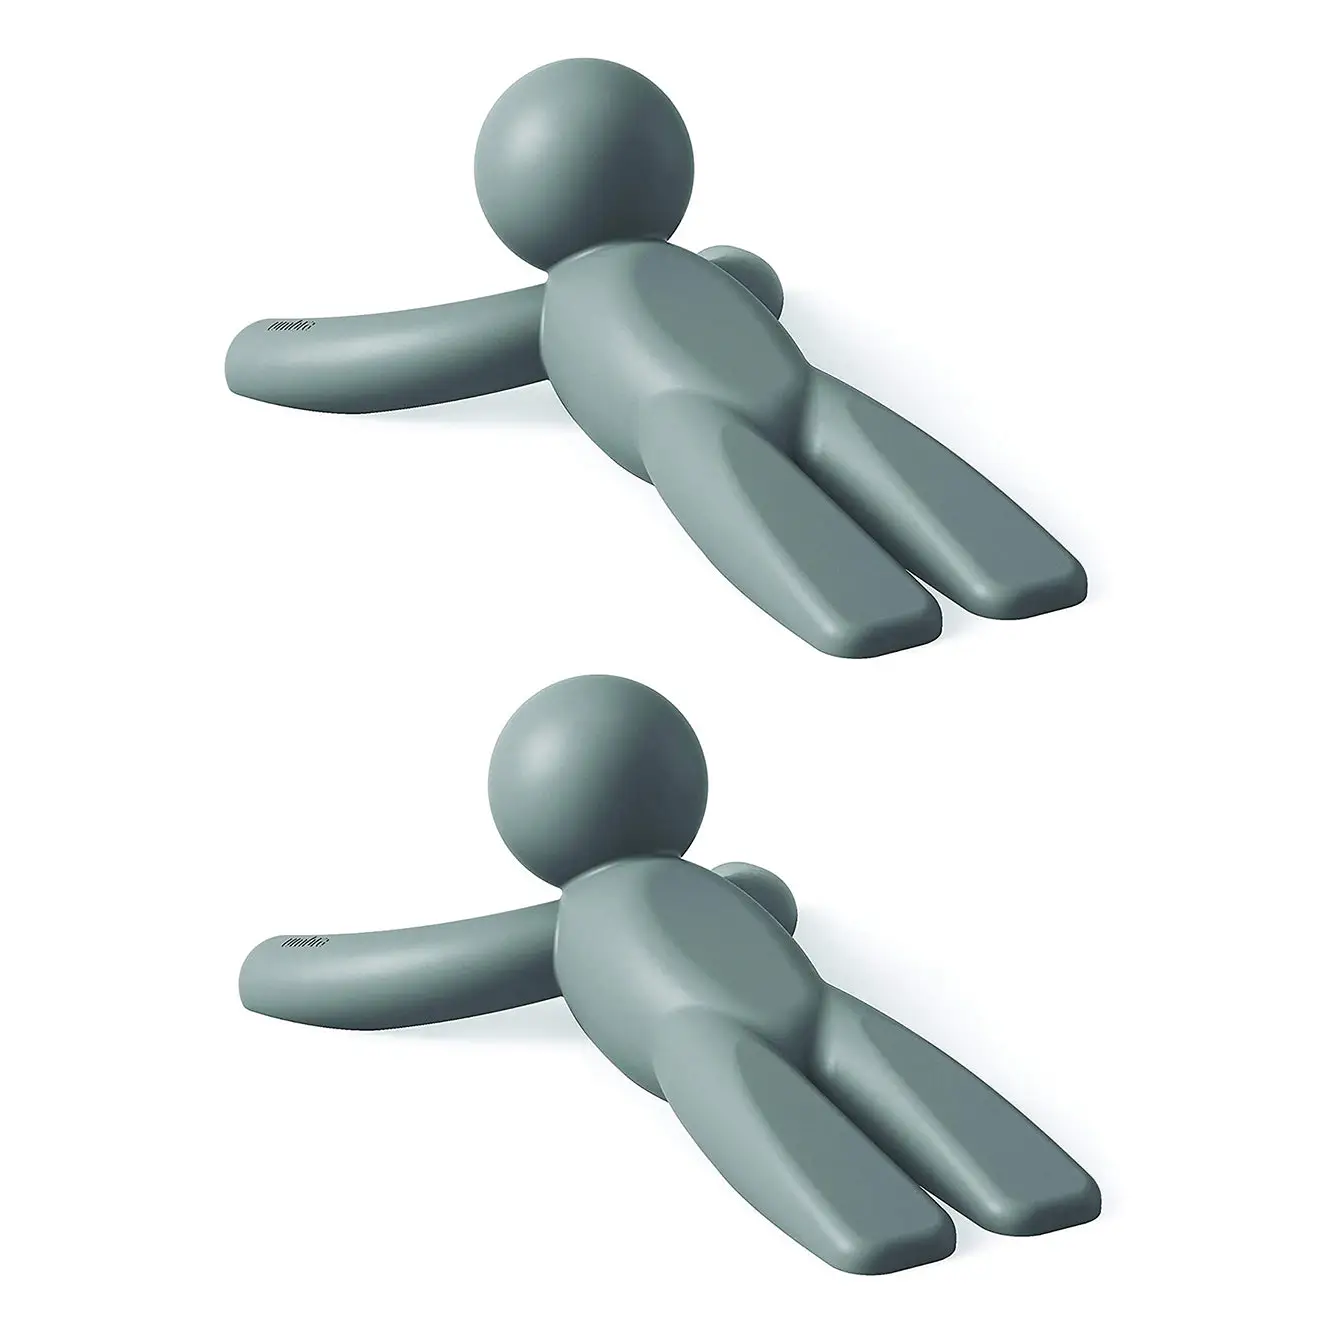 Umbra Buddy Soft-Touch Thermoplastic Rubber Doorstop (2 pc